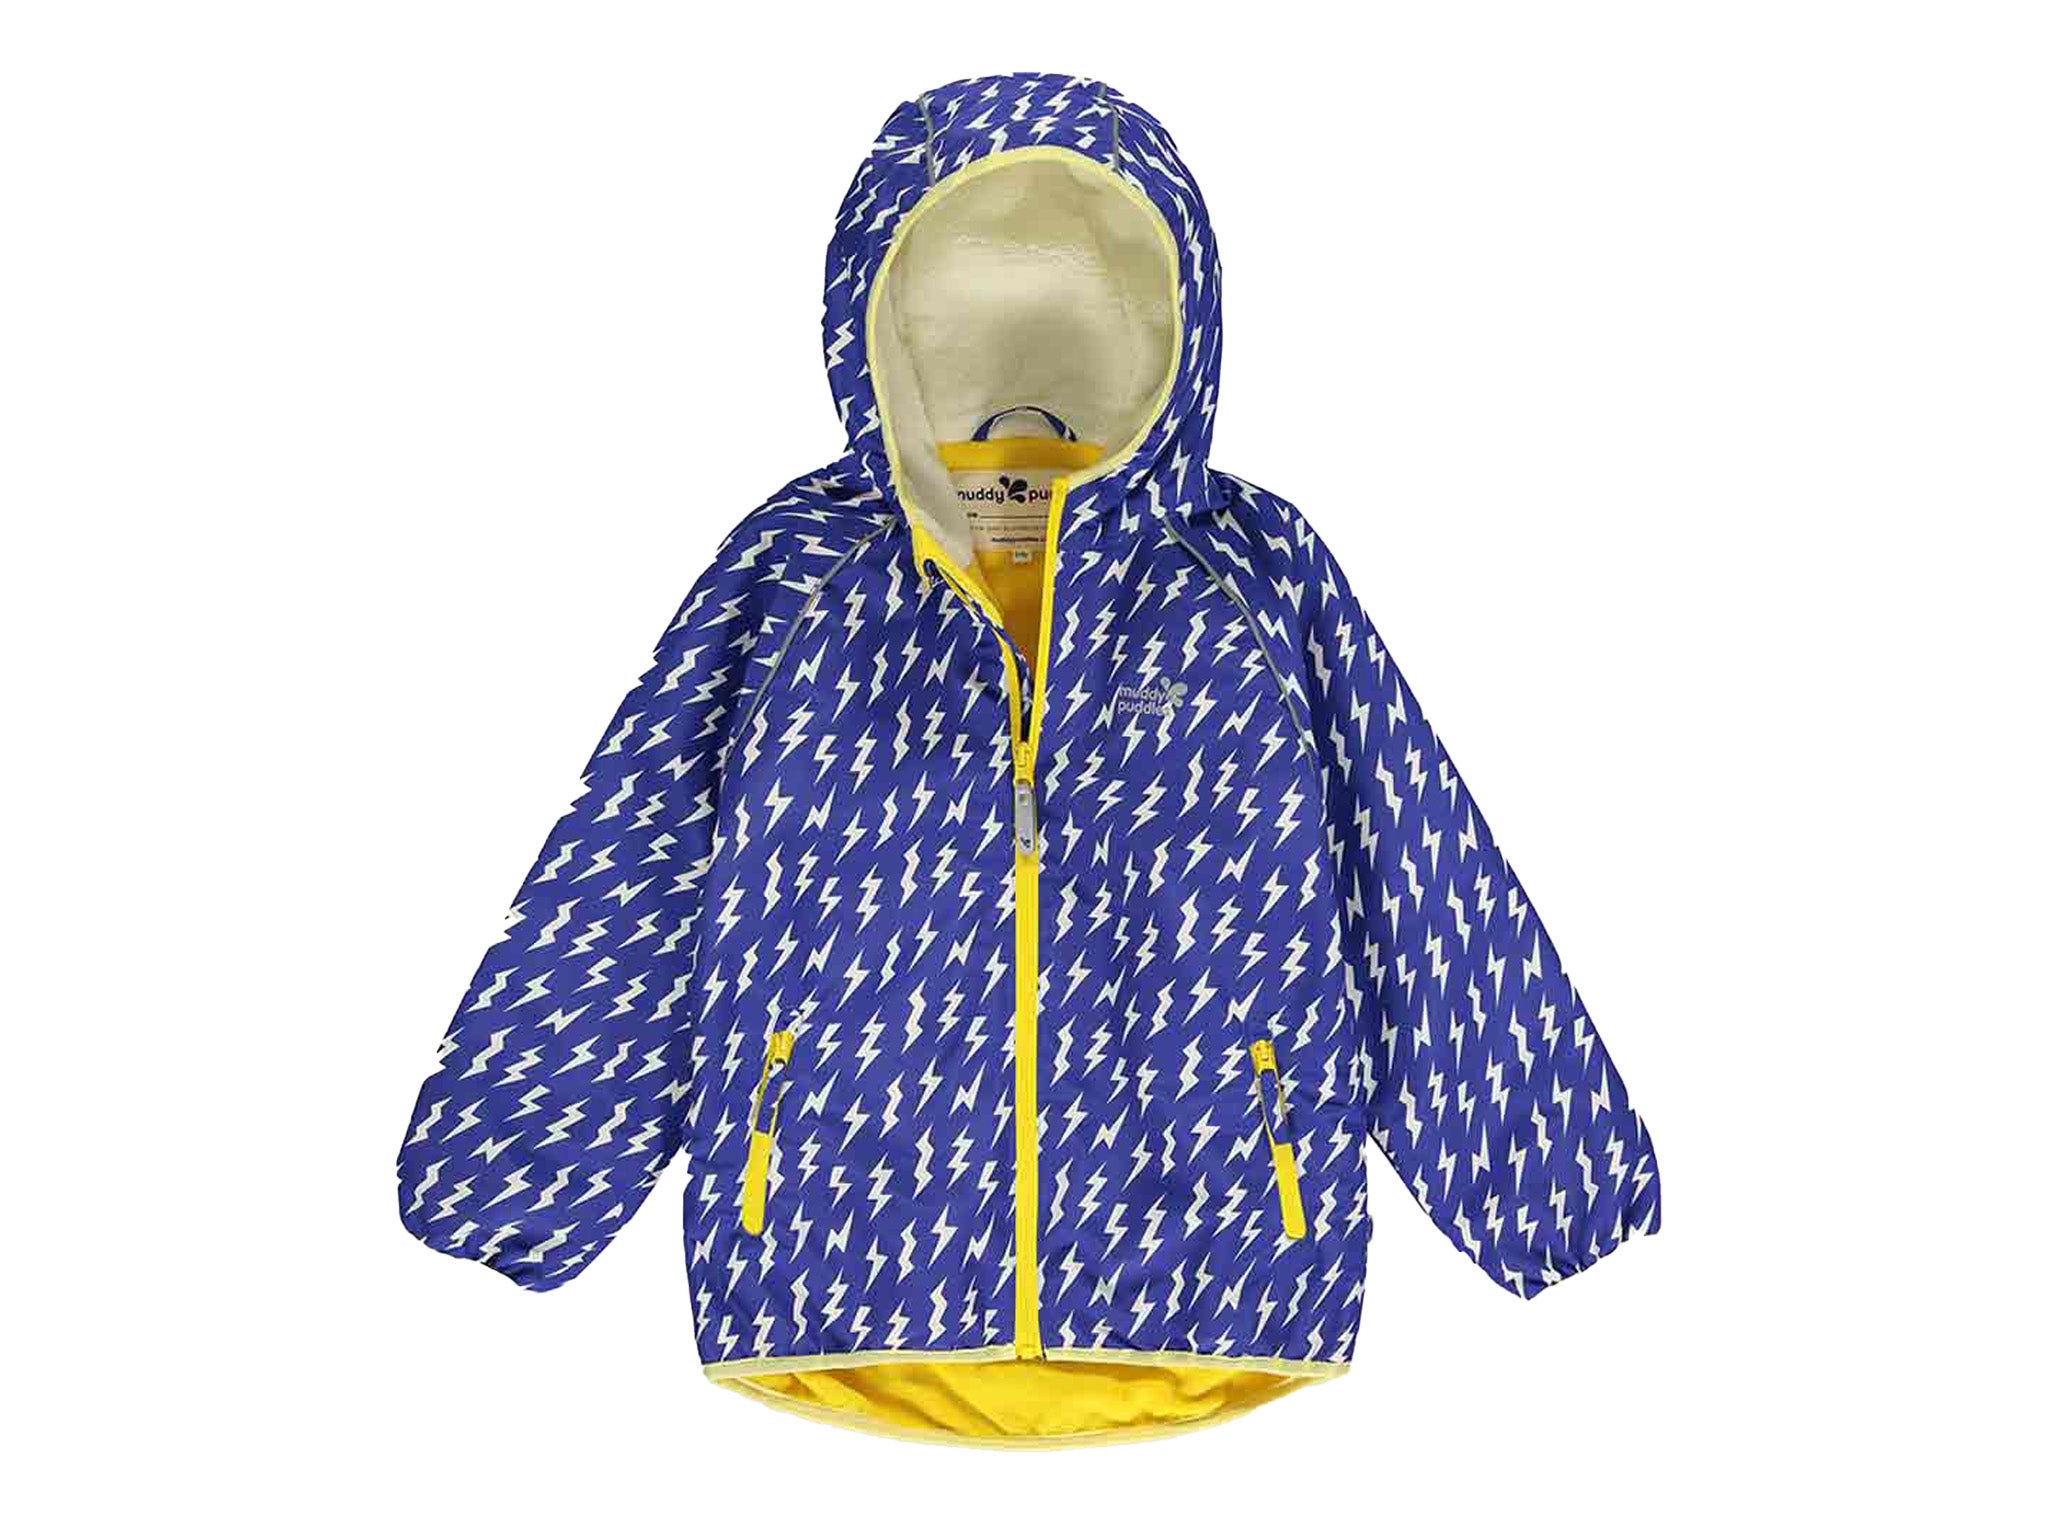 muddypuddles-Indybest-raincoats-review.jpg